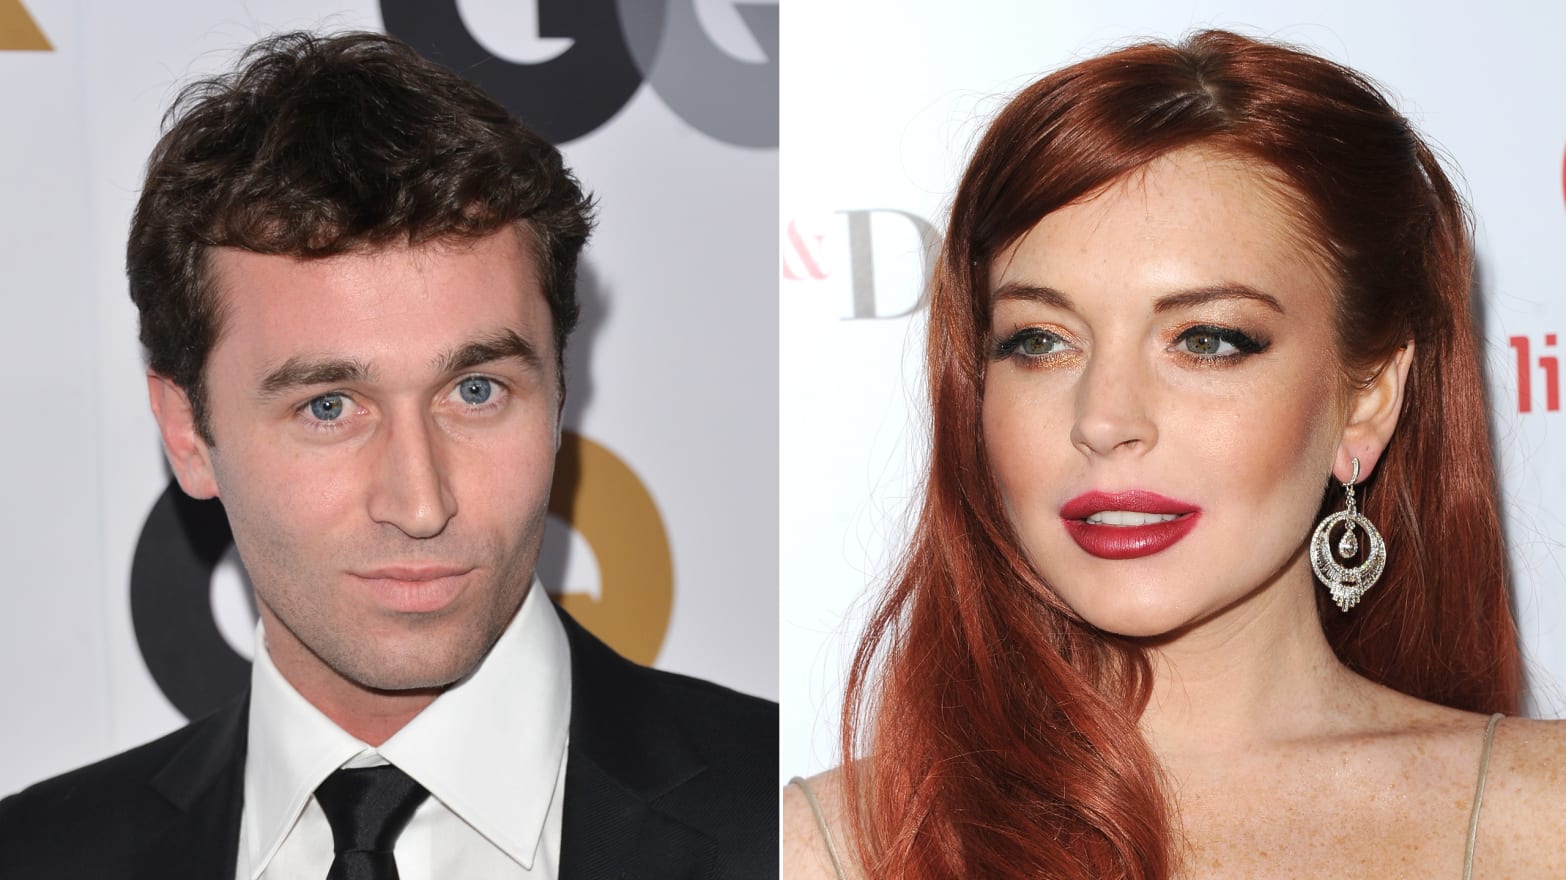 Porn Star James Deen on His пїЅCanyonsпїЅ Experience With Lindsa